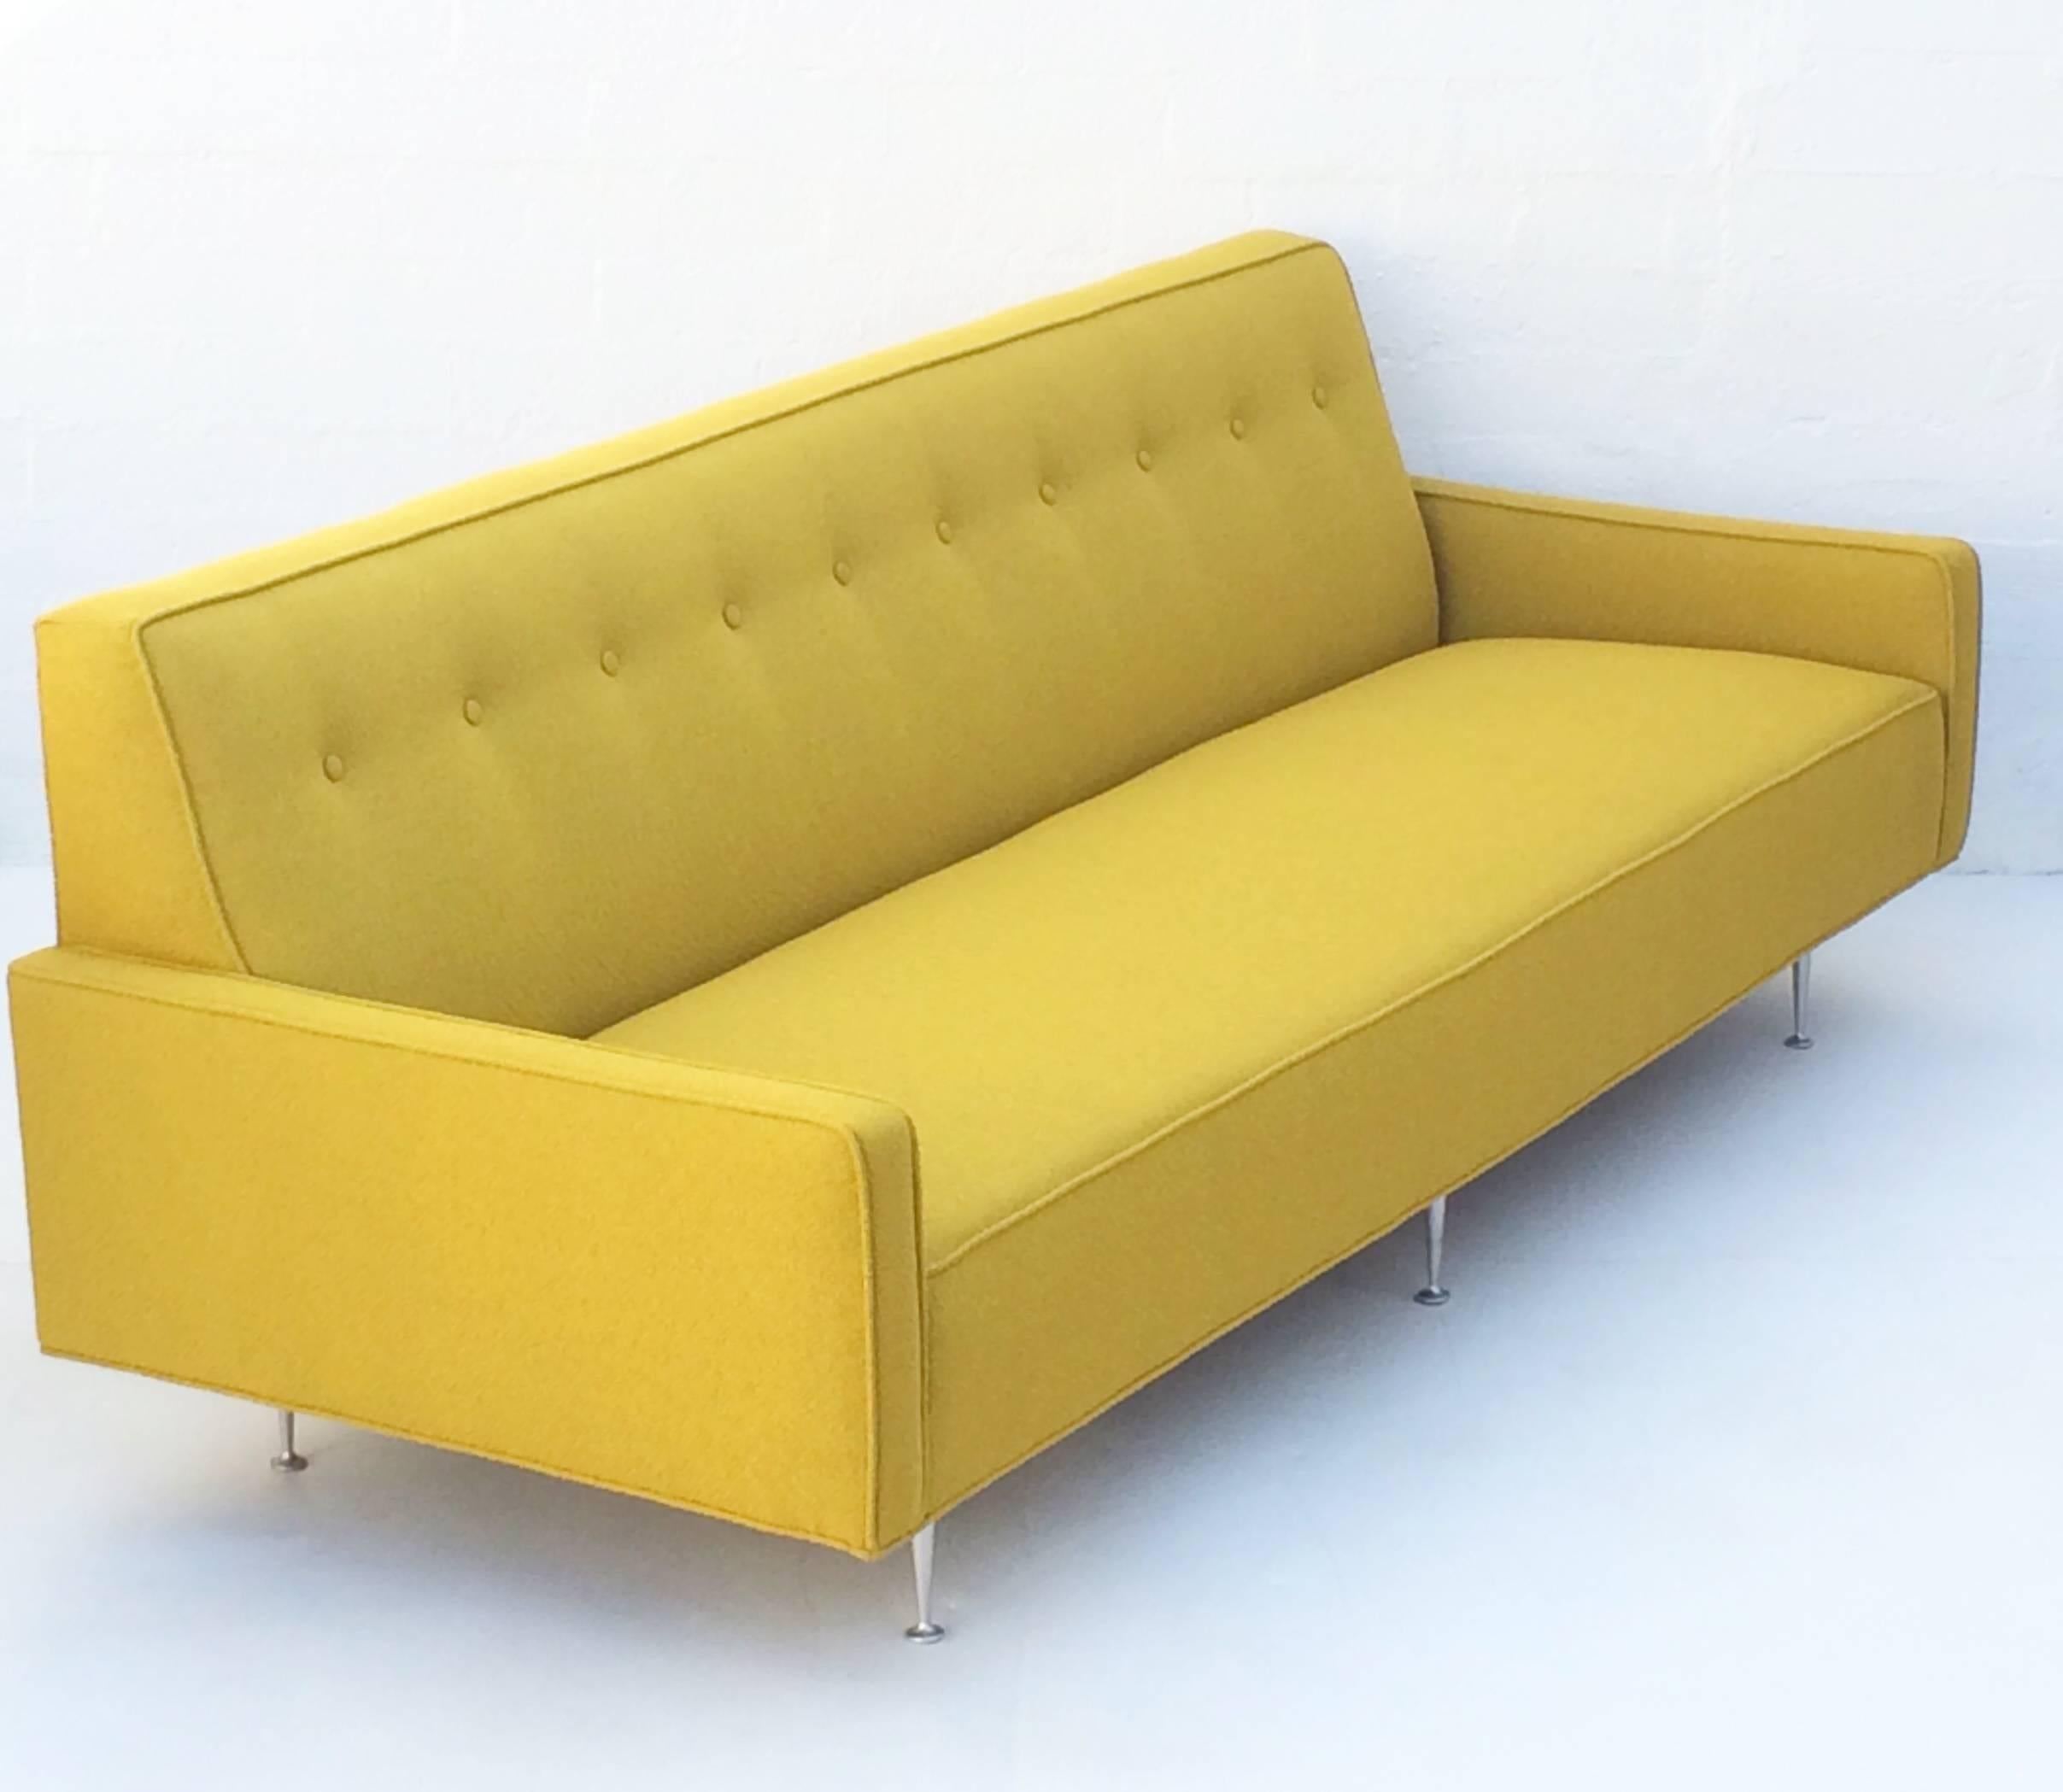 Gorgeous Thin Edge sofa designed by George Nelson and made by Herman Miller.
This early 1950s sofa has solid cast aluminum legs and is newly reupholstered in a stunning mustard color Knoll style fabric.